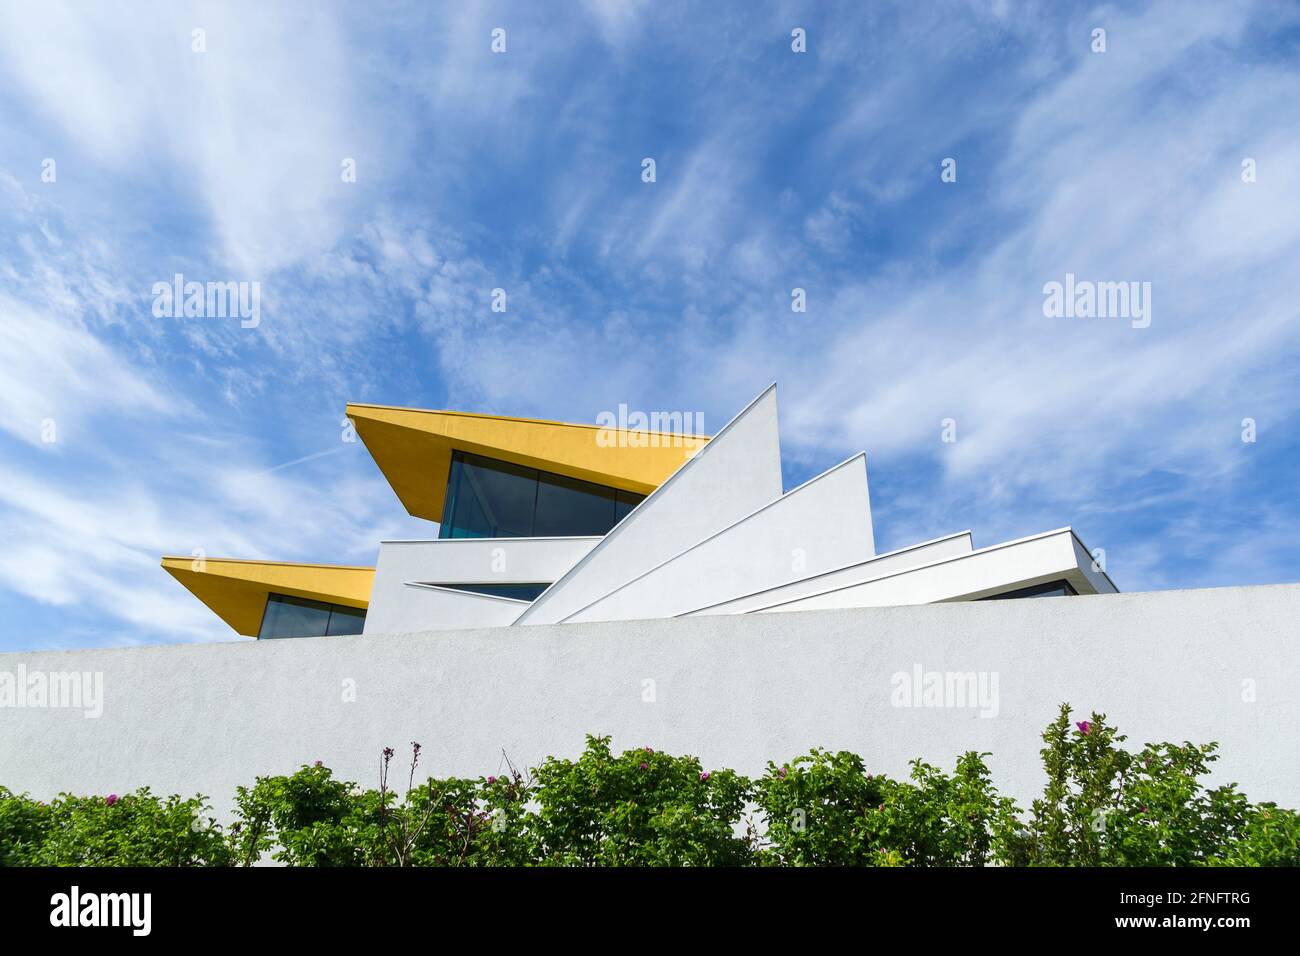 Strelitzia house modern expressionist architecture private residence Stock Photo